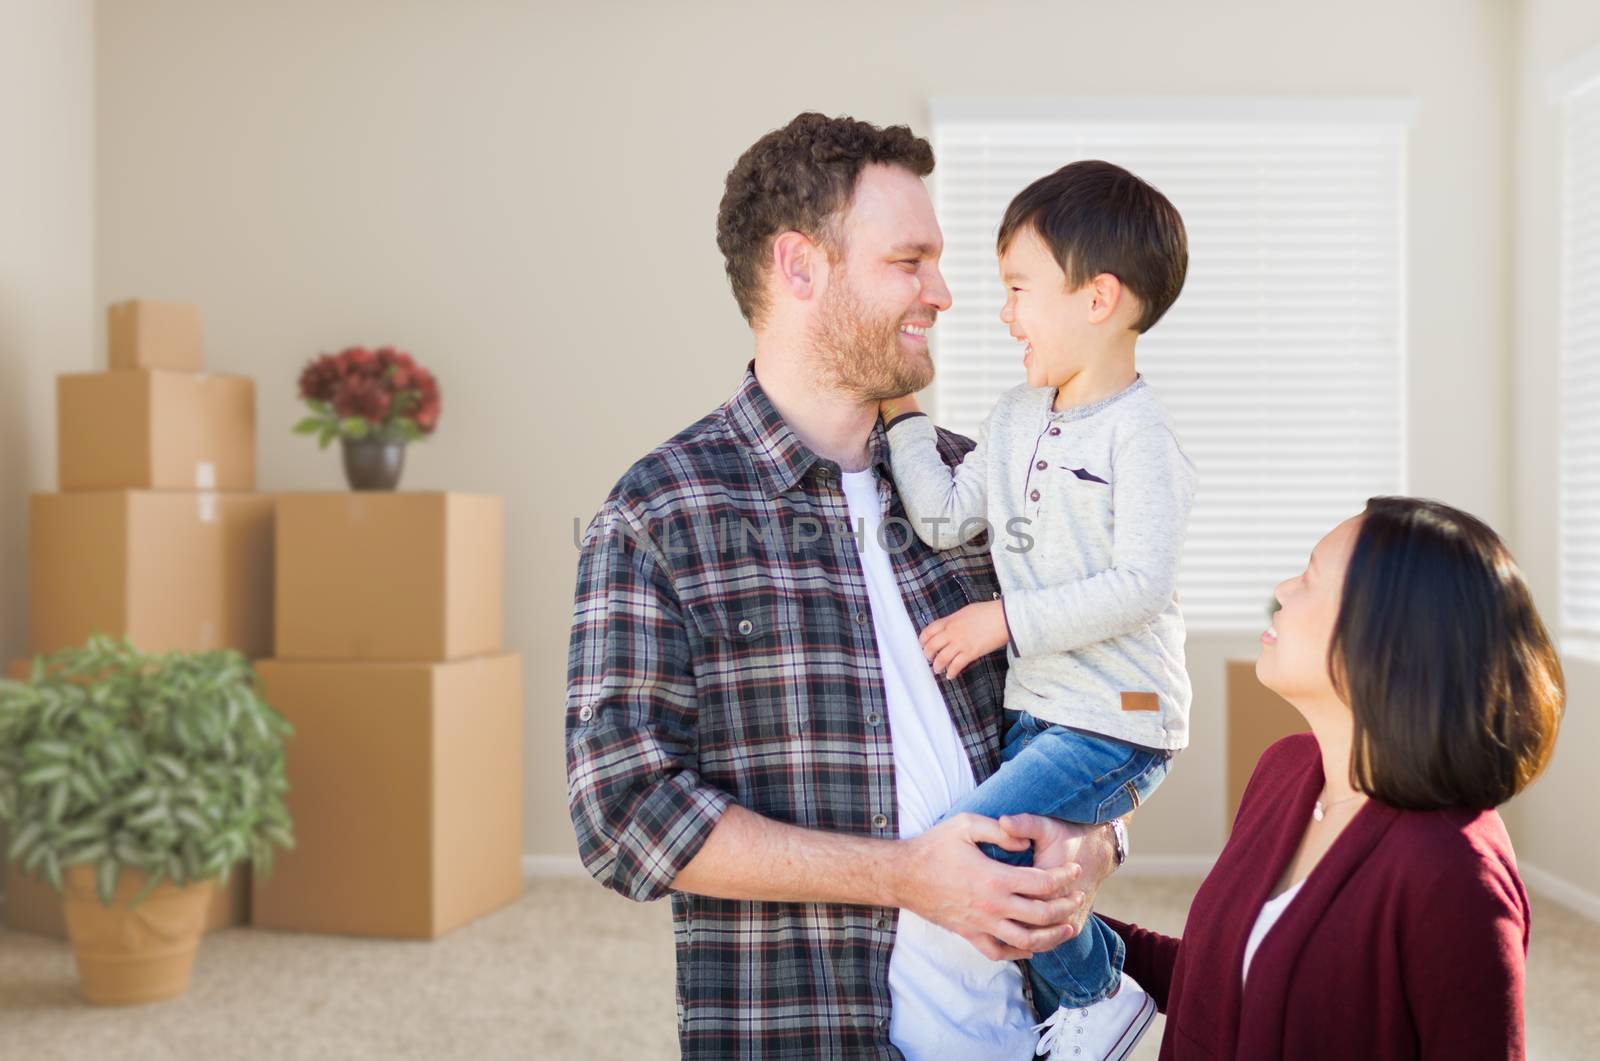 Young Mixed Race Caucasian and Chinese Family Inside Empty Room with Moving Boxes. by Feverpitched